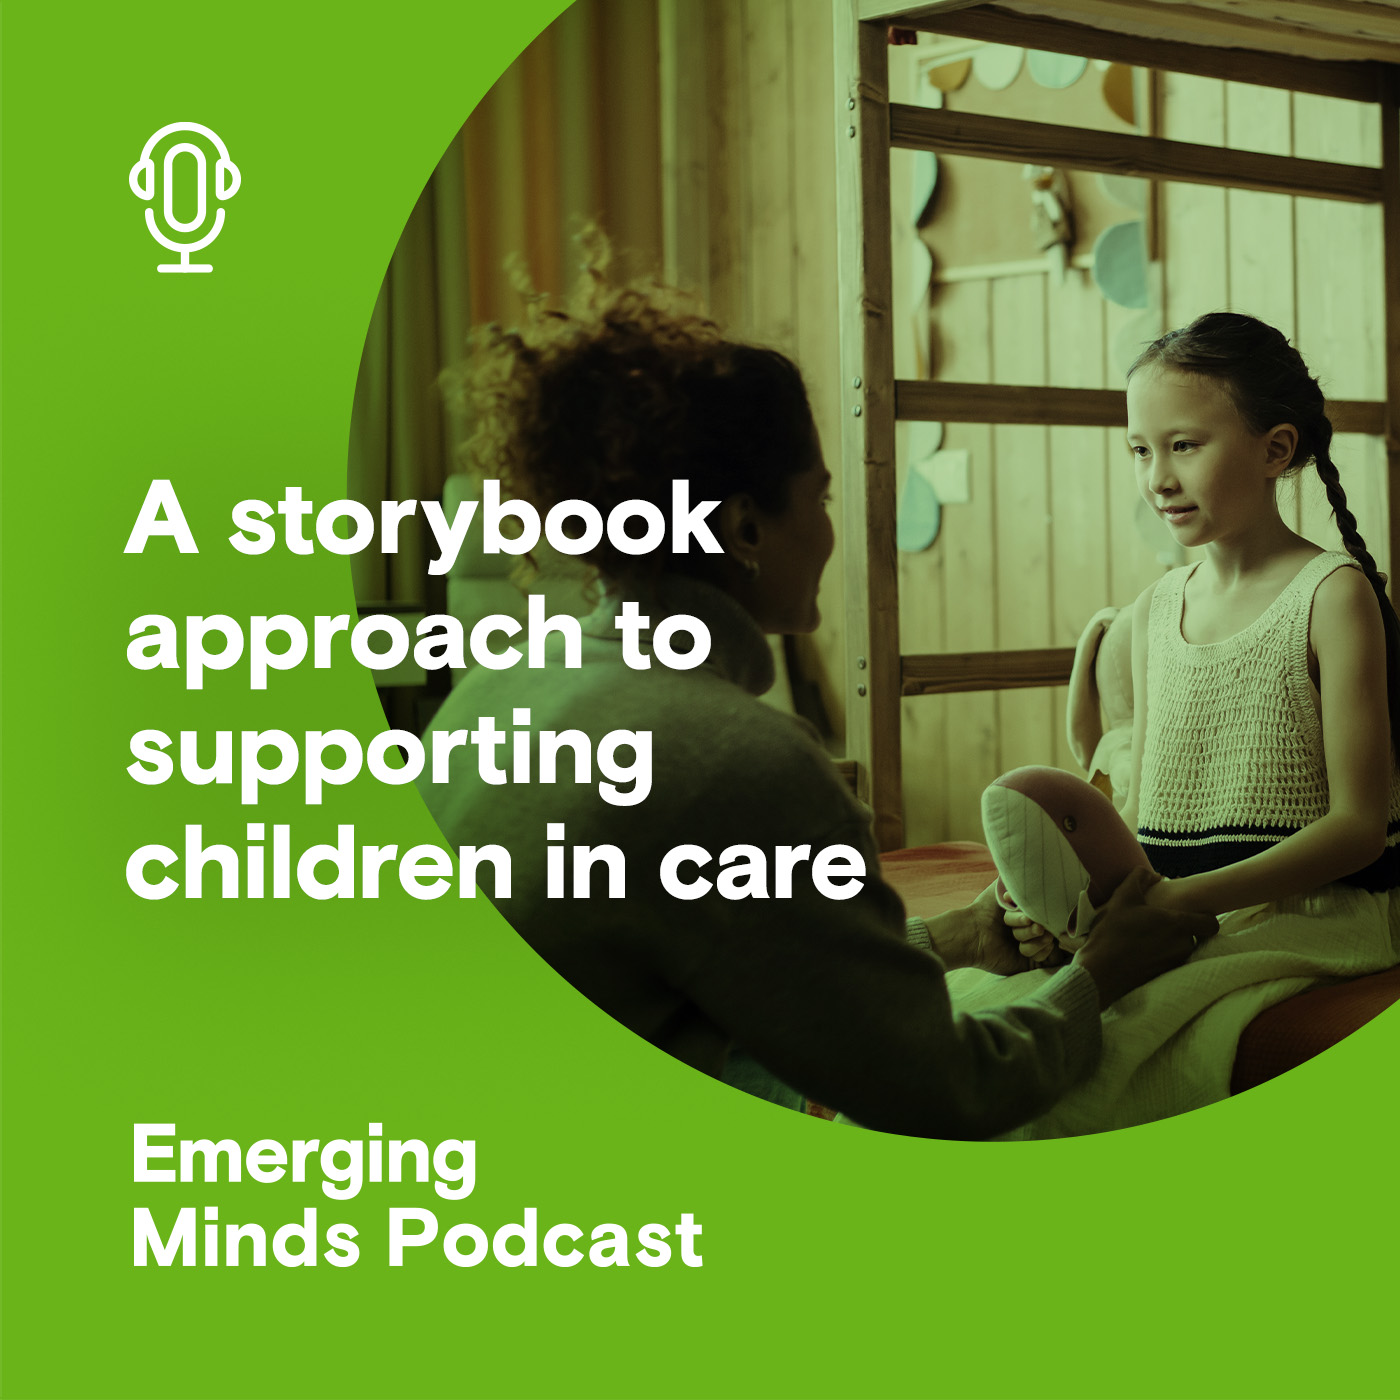 A storybook approach to supporting children in care